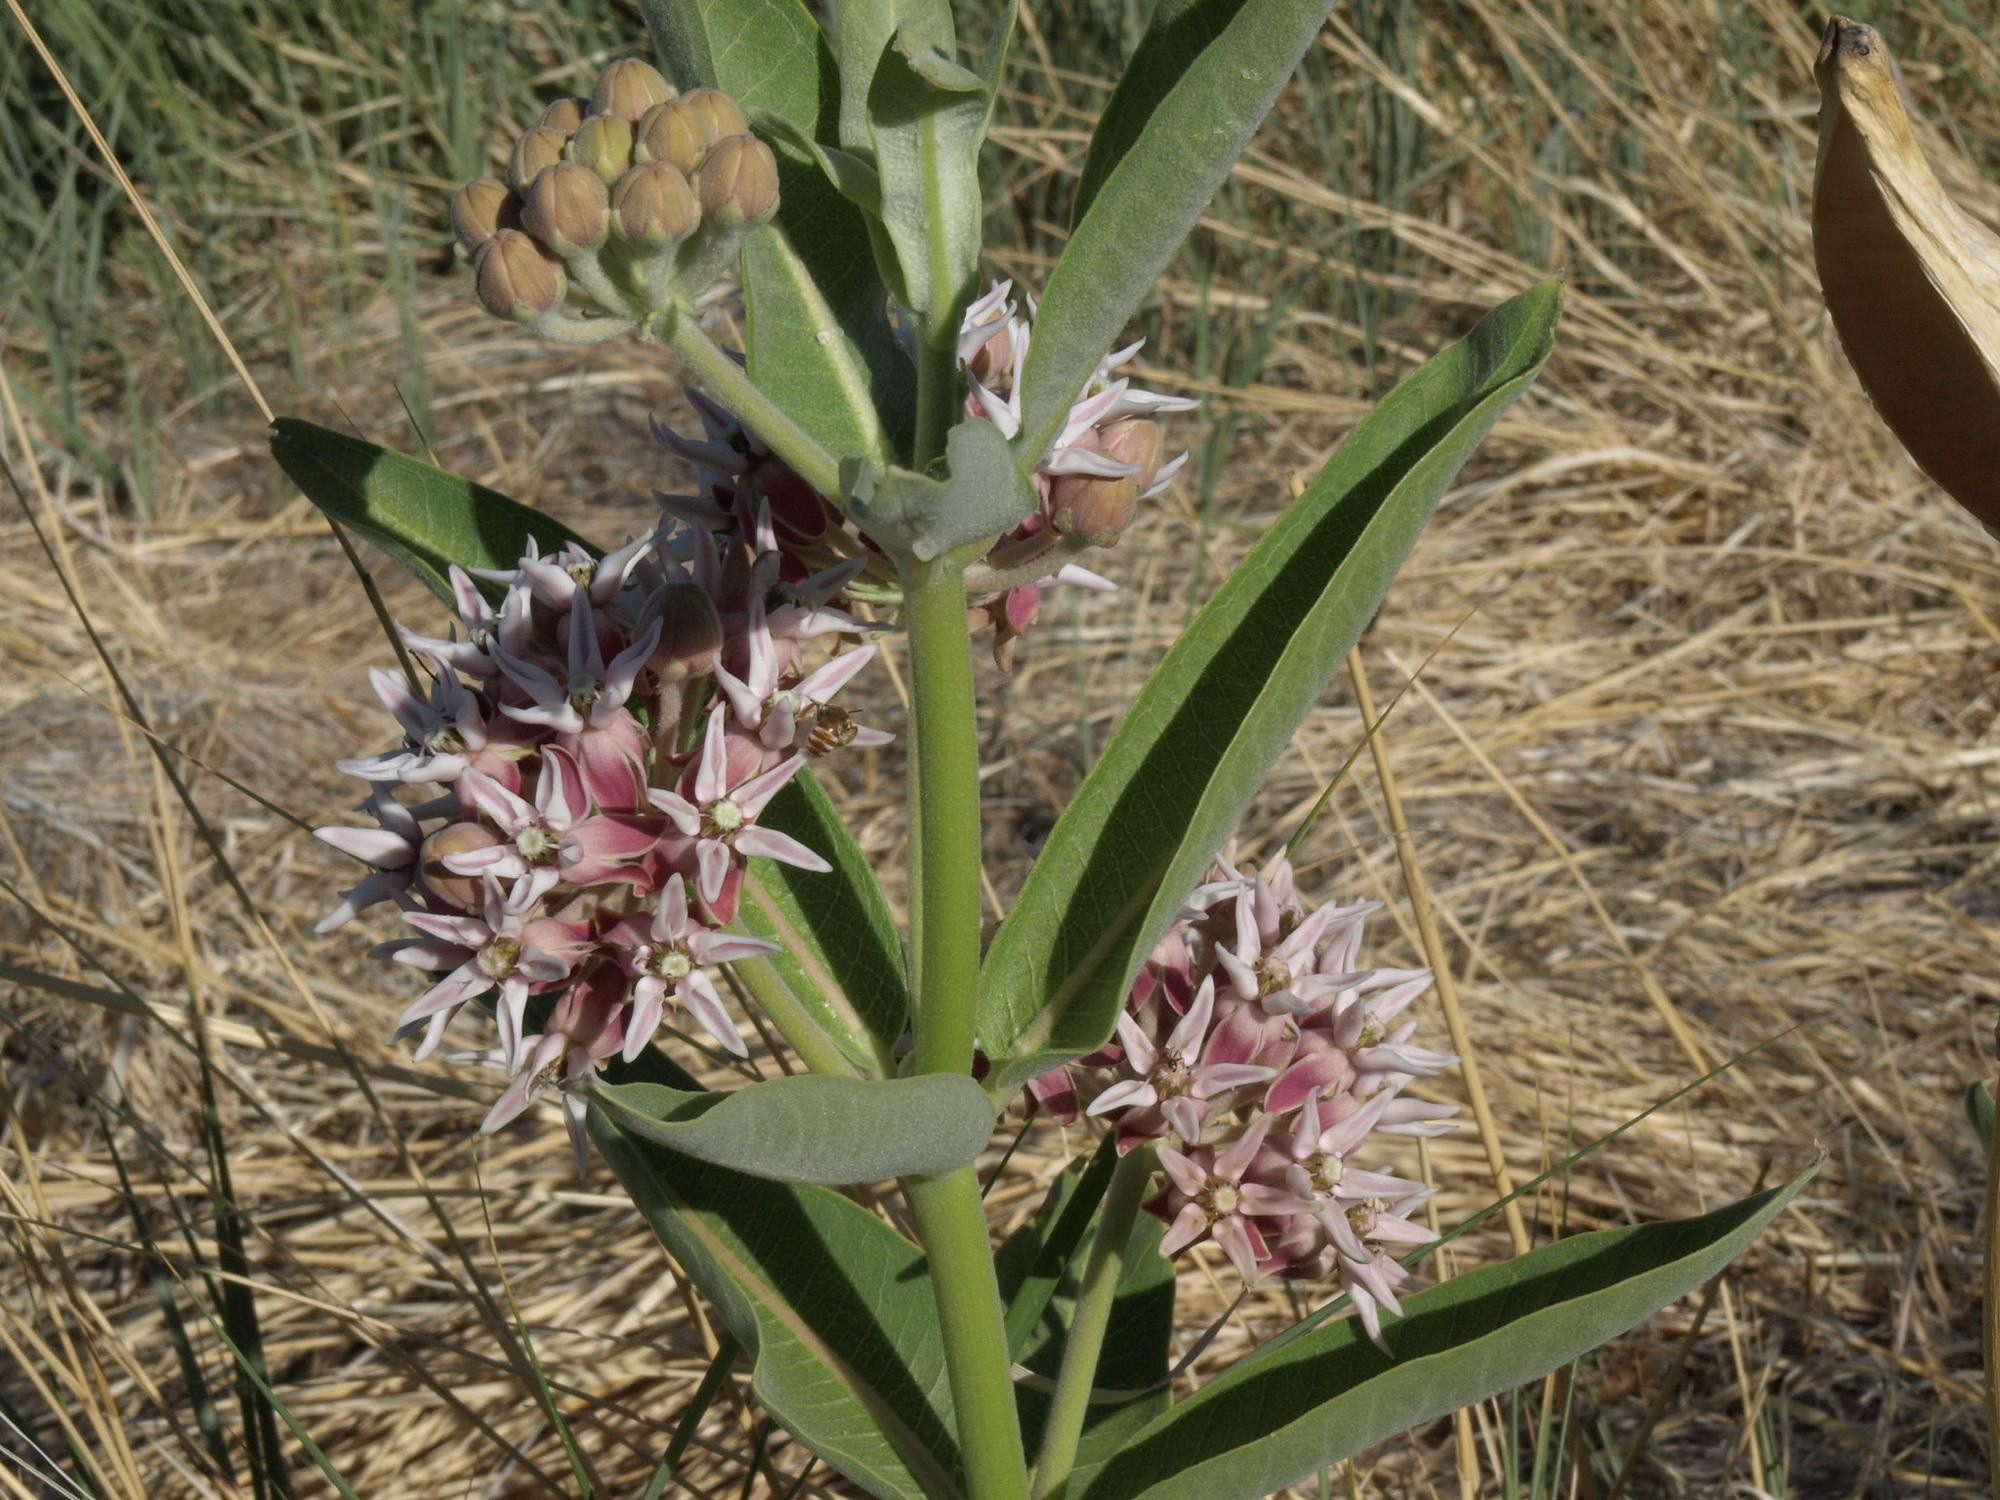 Showy milkweed, a plant poisonous to livestock.